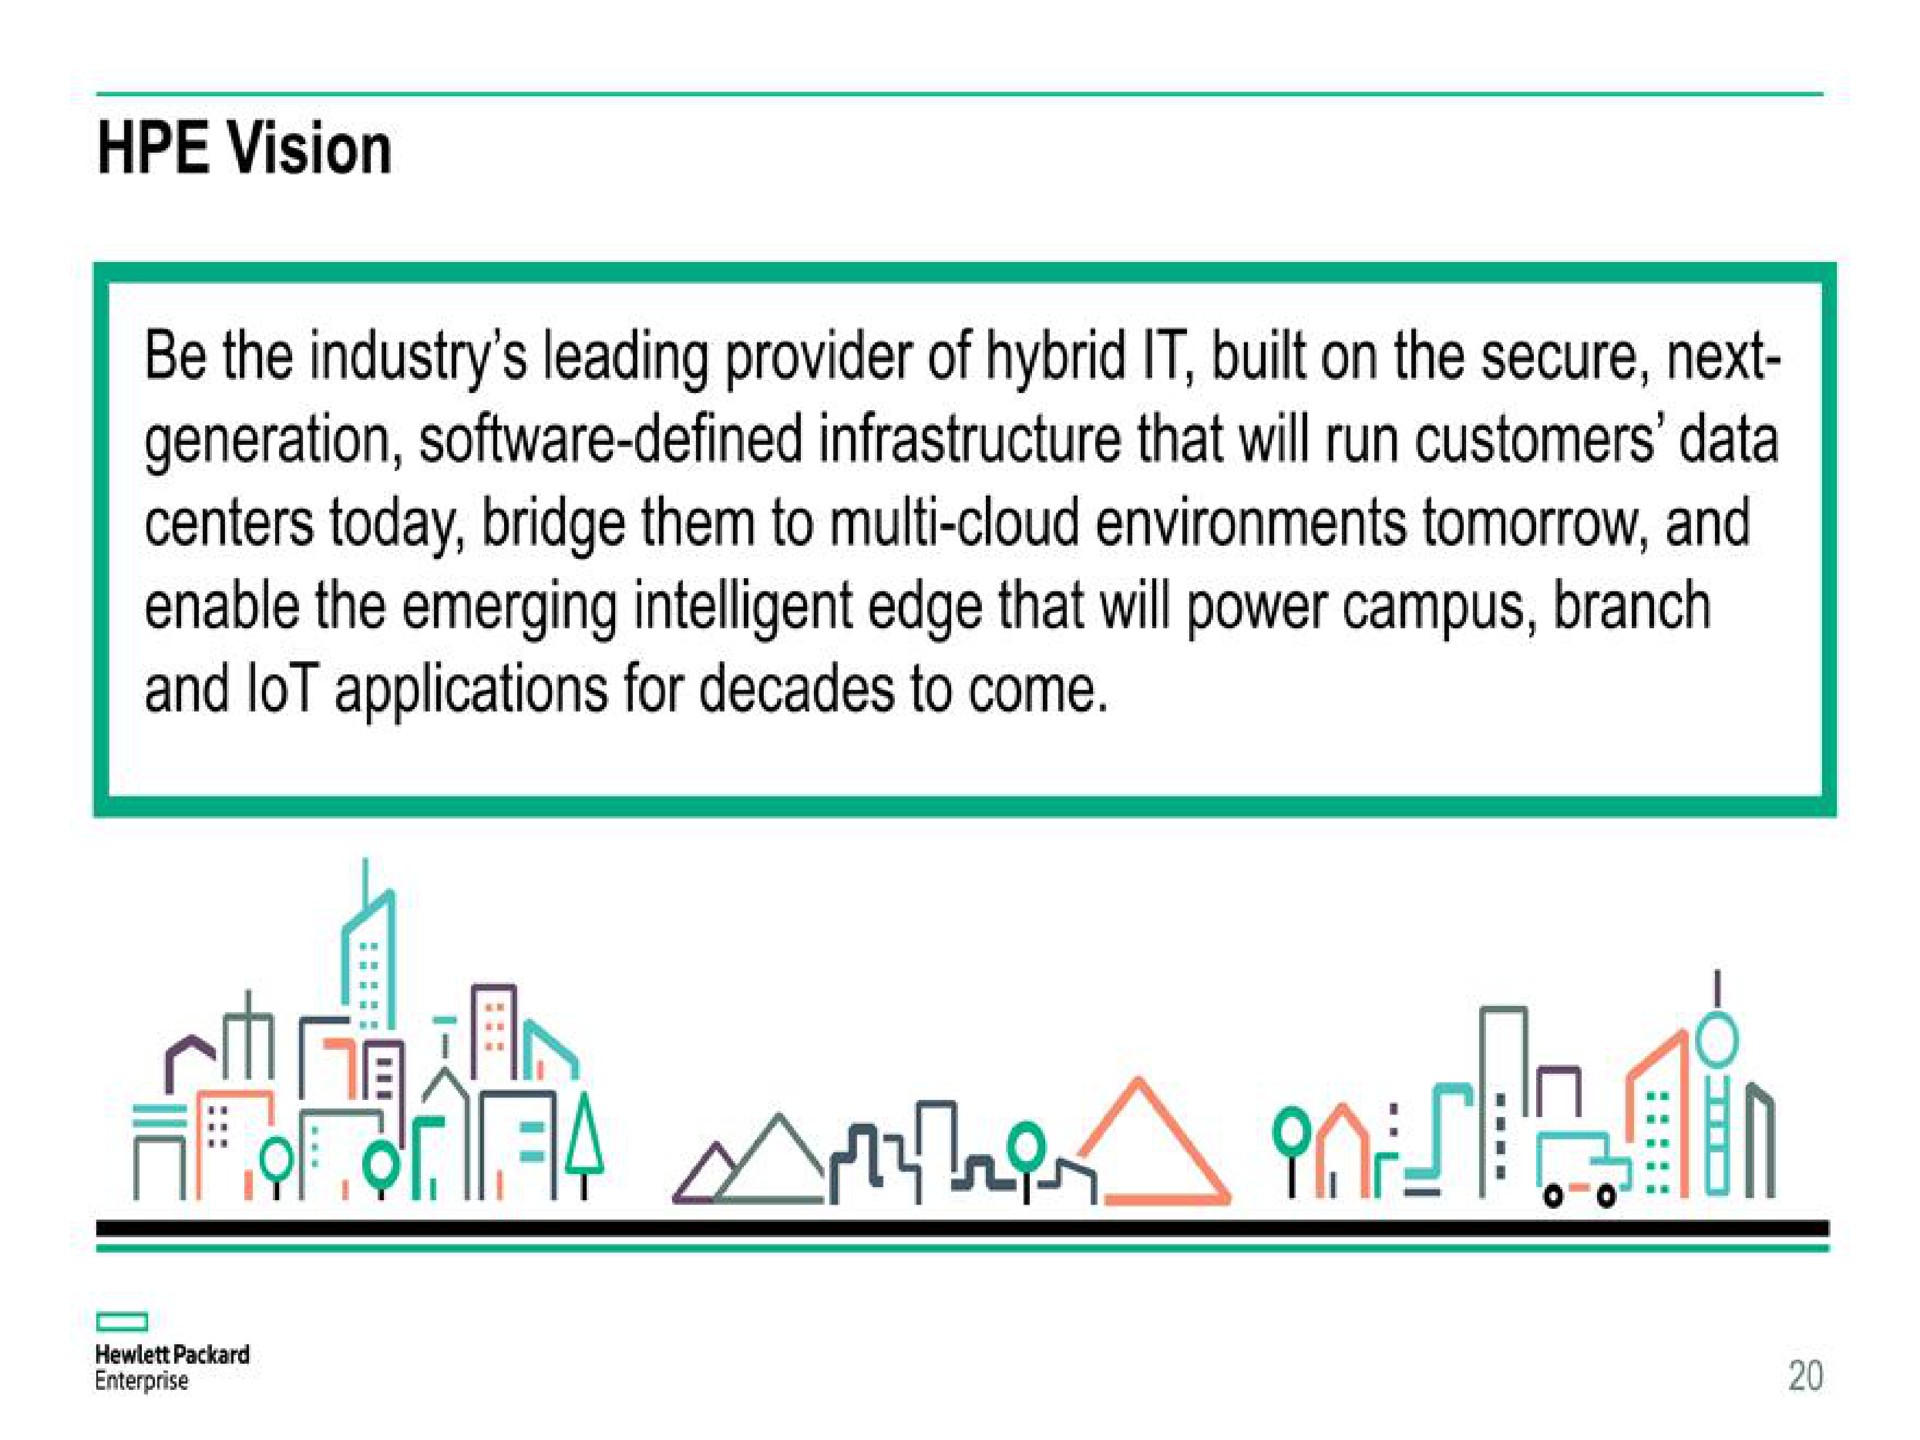 vision be the industry leading provider of hybrid it built on the secure next generation defined infrastructure that will run customers data centers today bridge them to cloud environments tomorrow and enable the emerging intelligent edge that will power campus branch bead nods wath | Hewlett Packard Enterprise